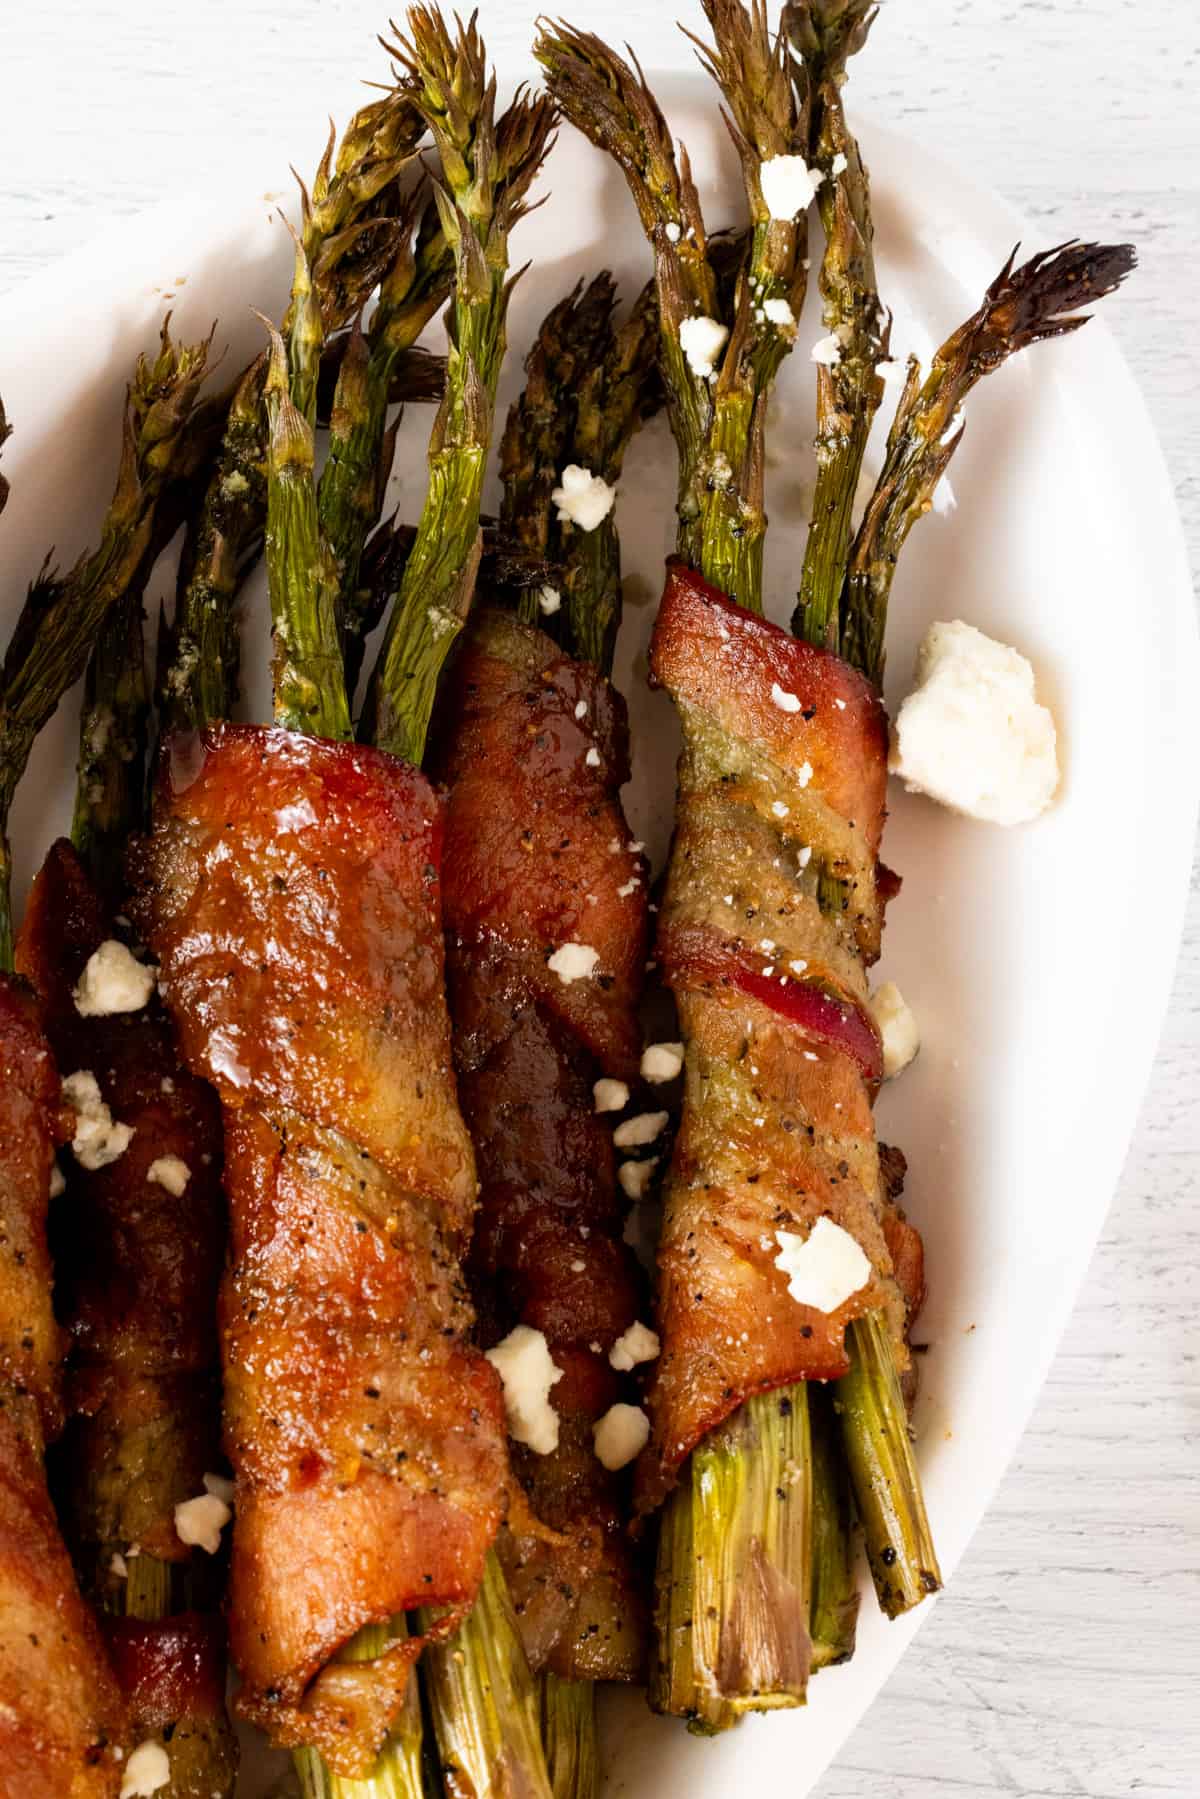 Asparagus wrapped in bacon on white plate.